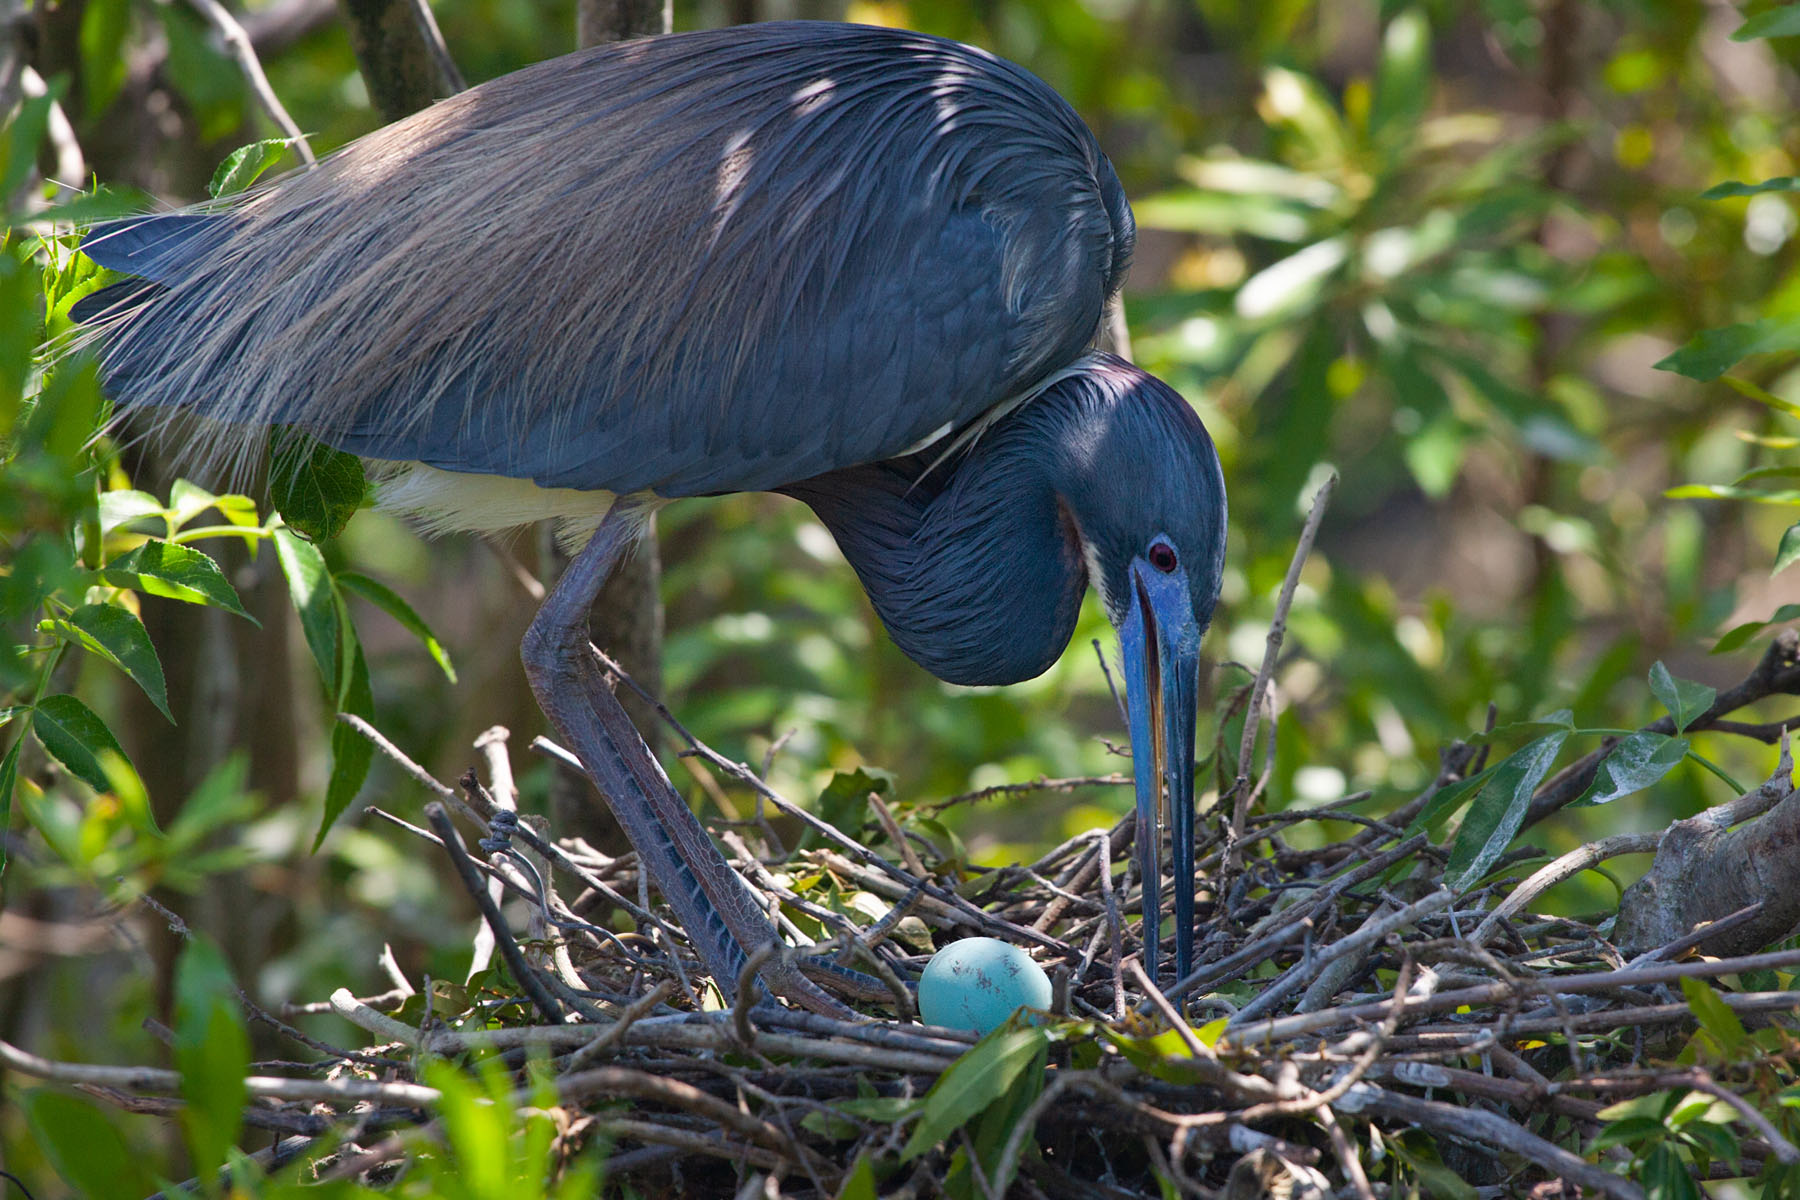 Heron and egg, St. Augustine Alligator Farm.  Click for next photo.